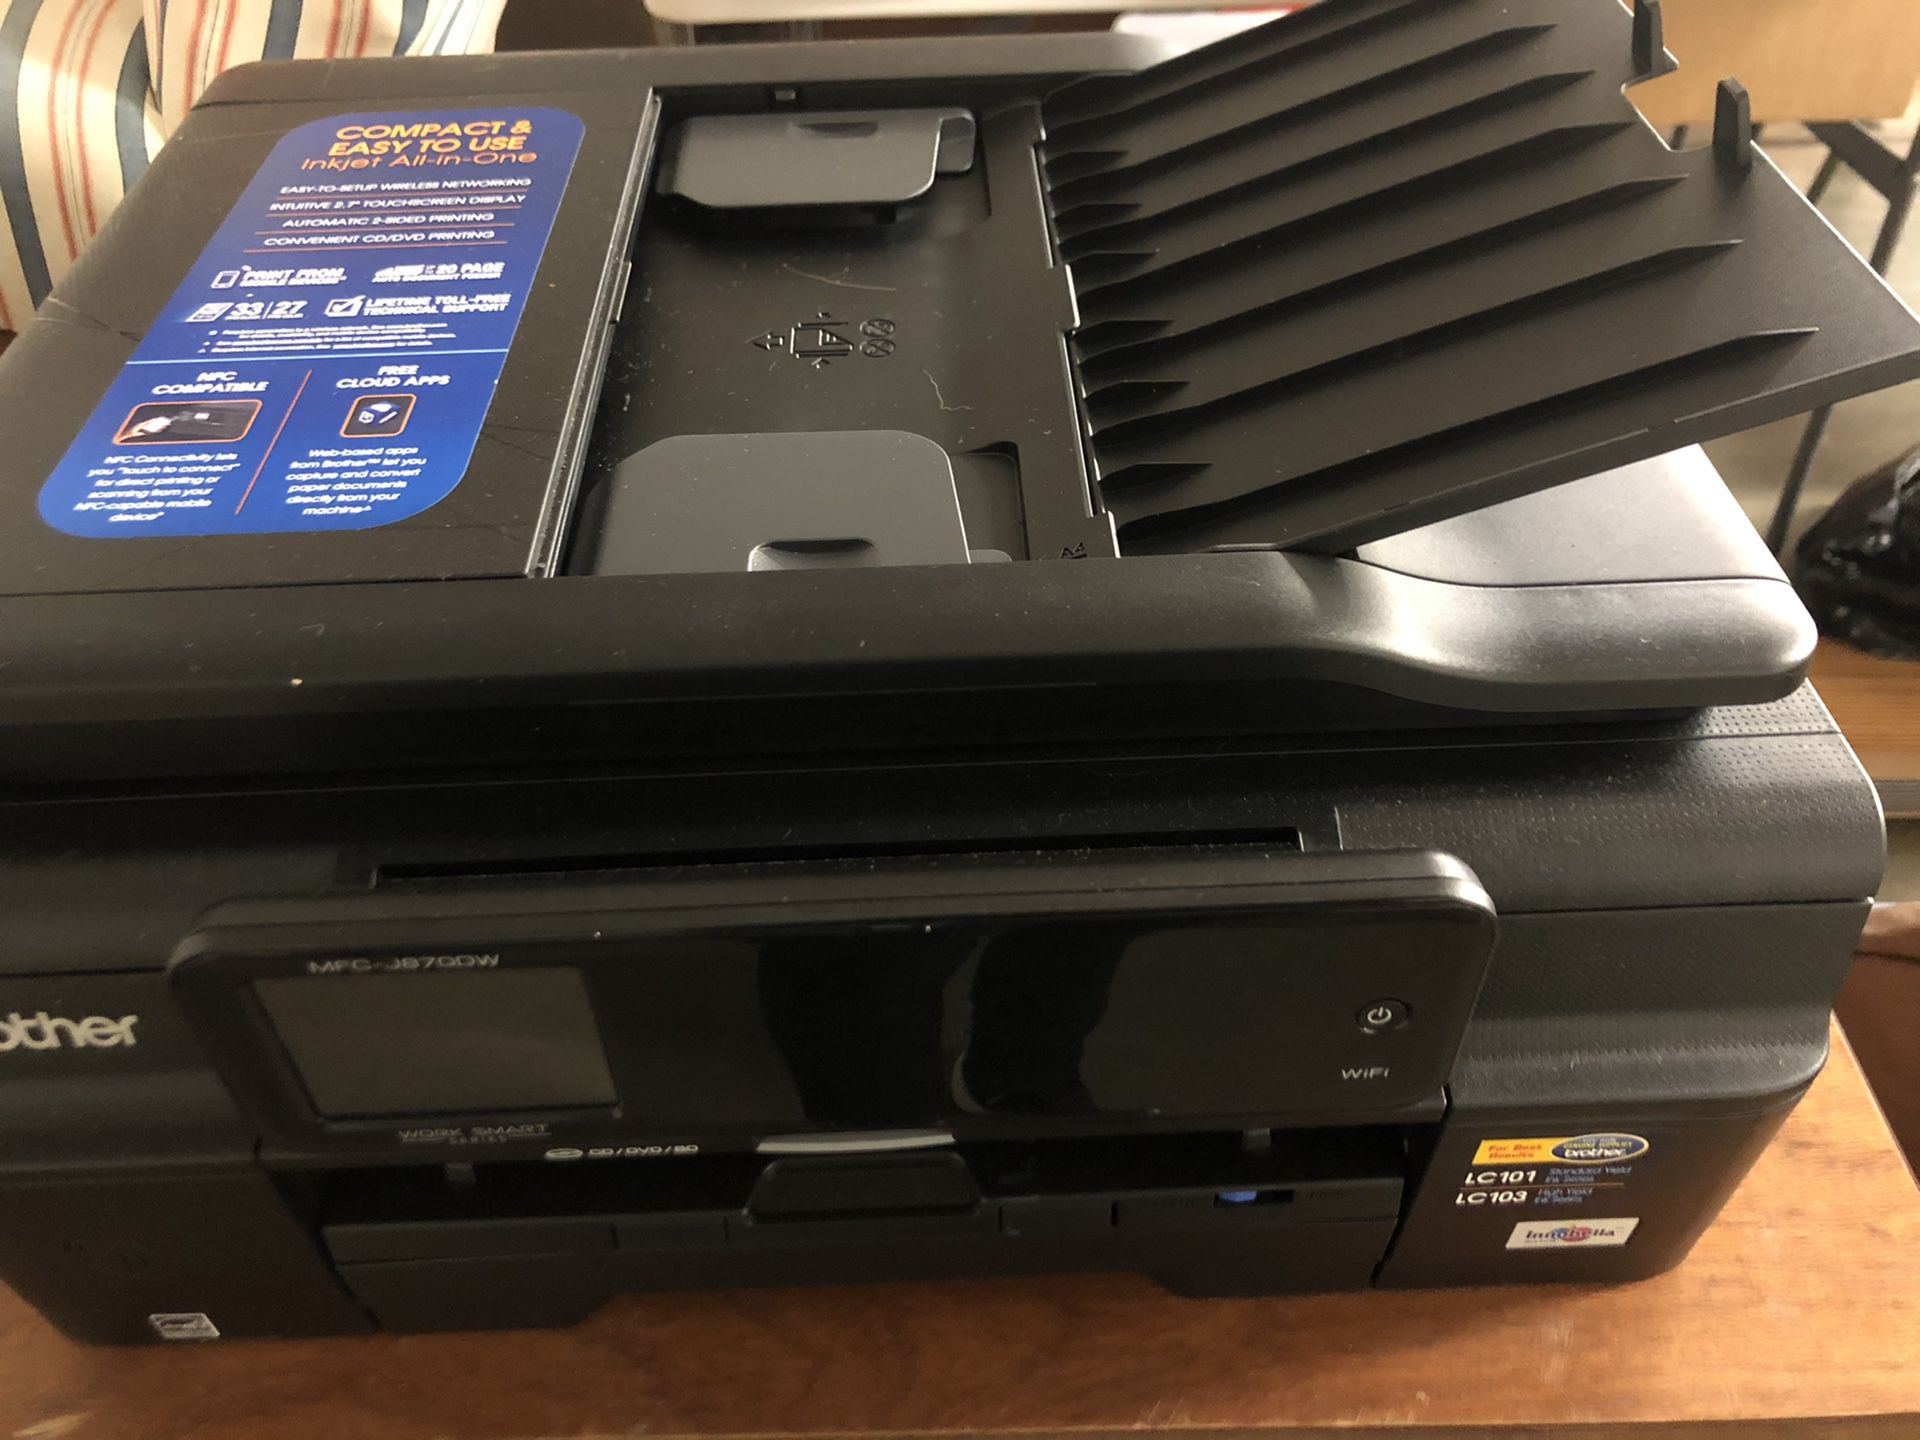 Brother All-in-One Printer